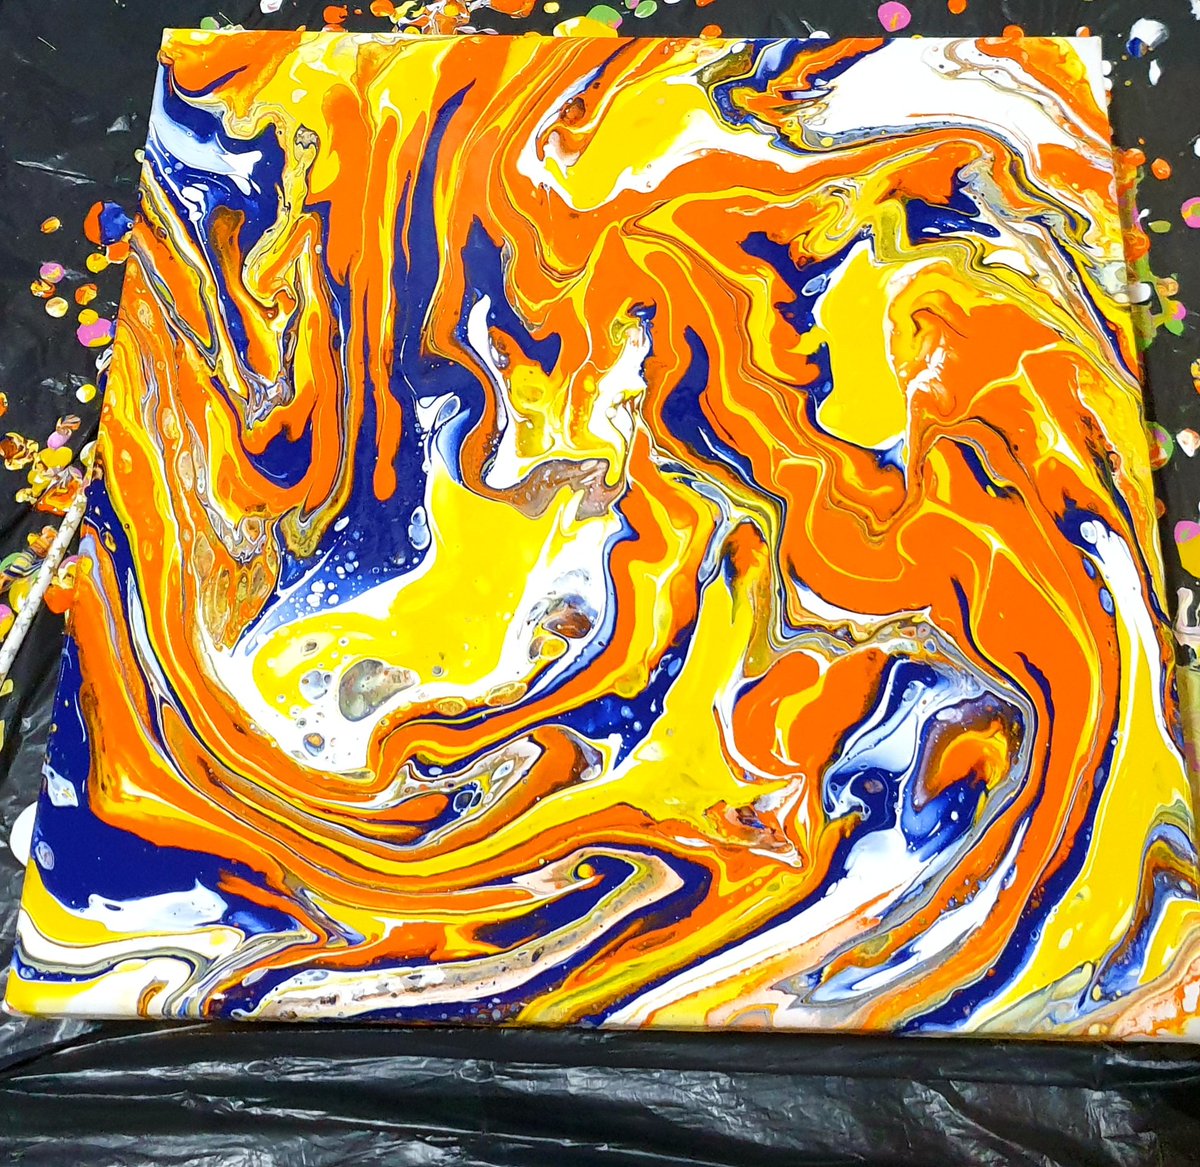 When you think lifes getting you down.. Relax..enjoy slapping Acrylic #paint on Canvas #mental Wellbeing @our_MoH @carolineshulman @artshomelessint @Jemima_G @bbcarts Drip Drip Drip ! 🤣